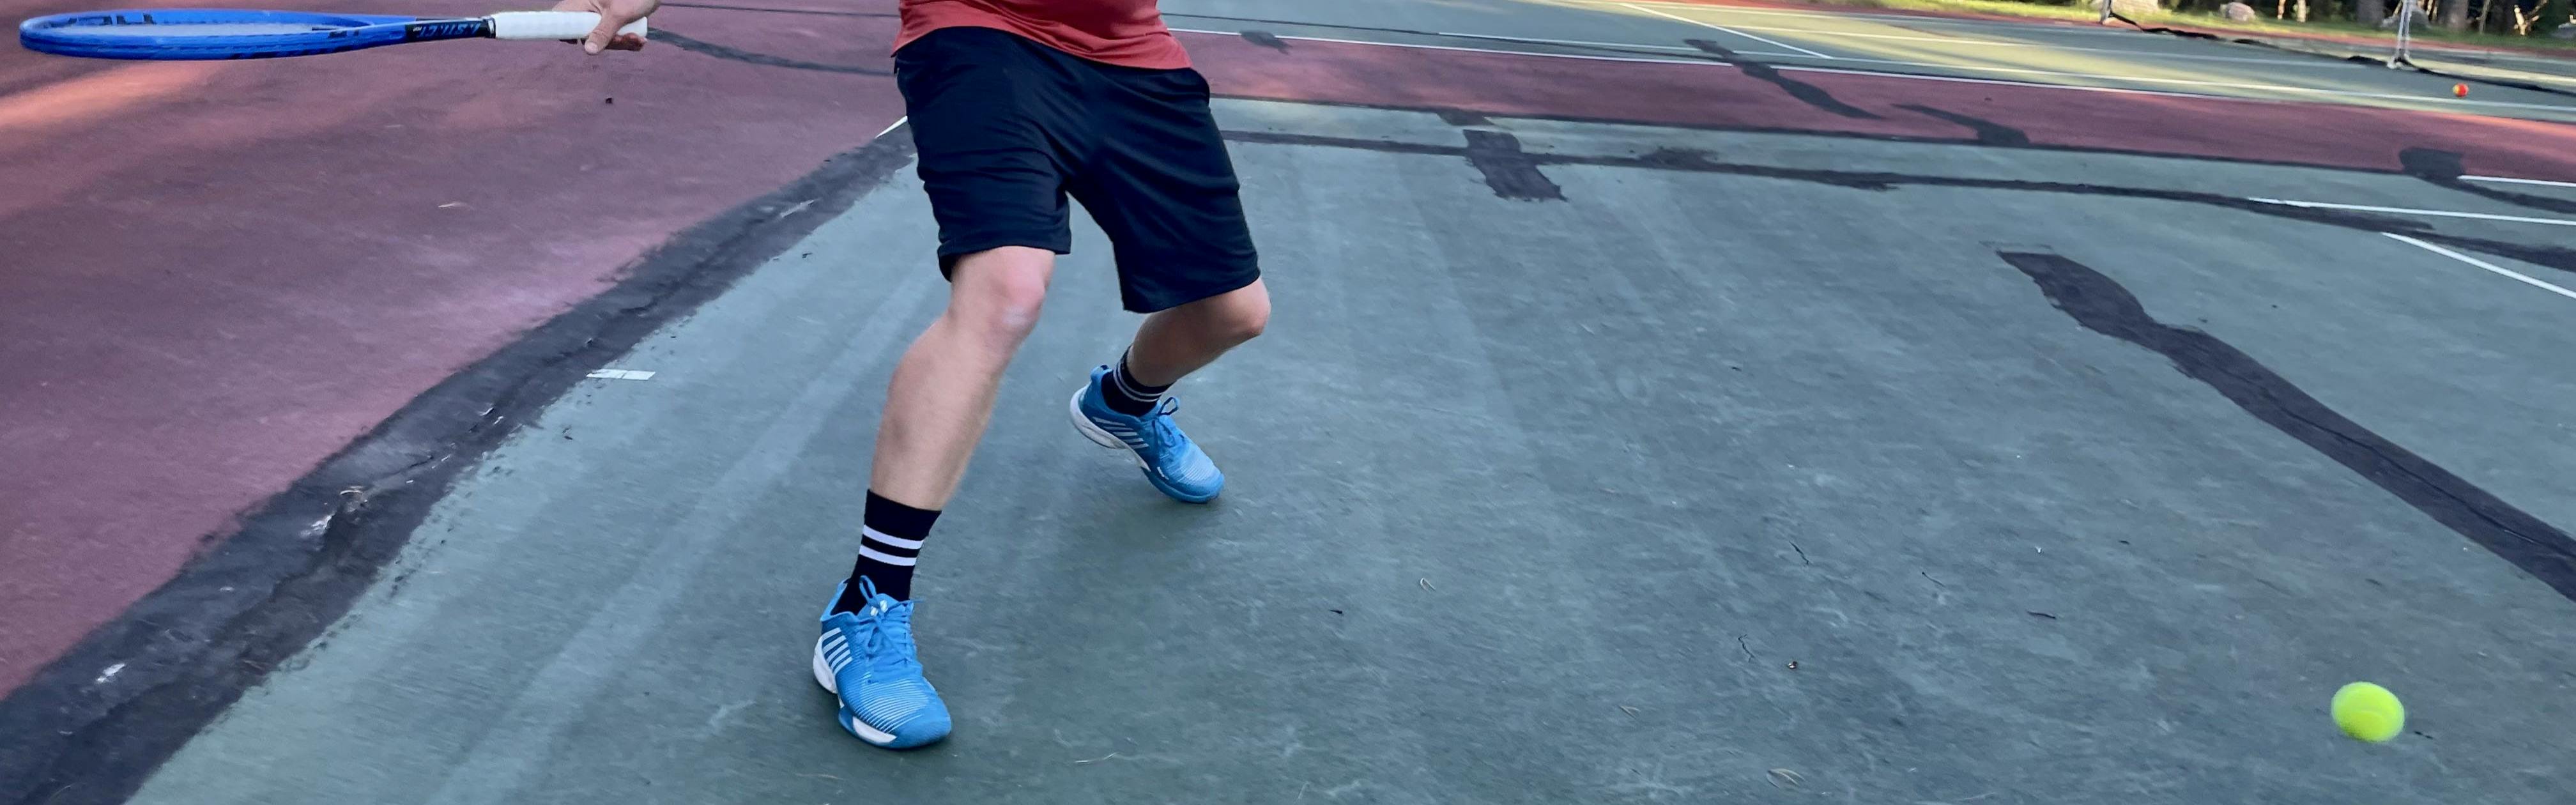 A tennis player in the  K-Swiss Men's Hypercourt Supreme Tennis Shoes.